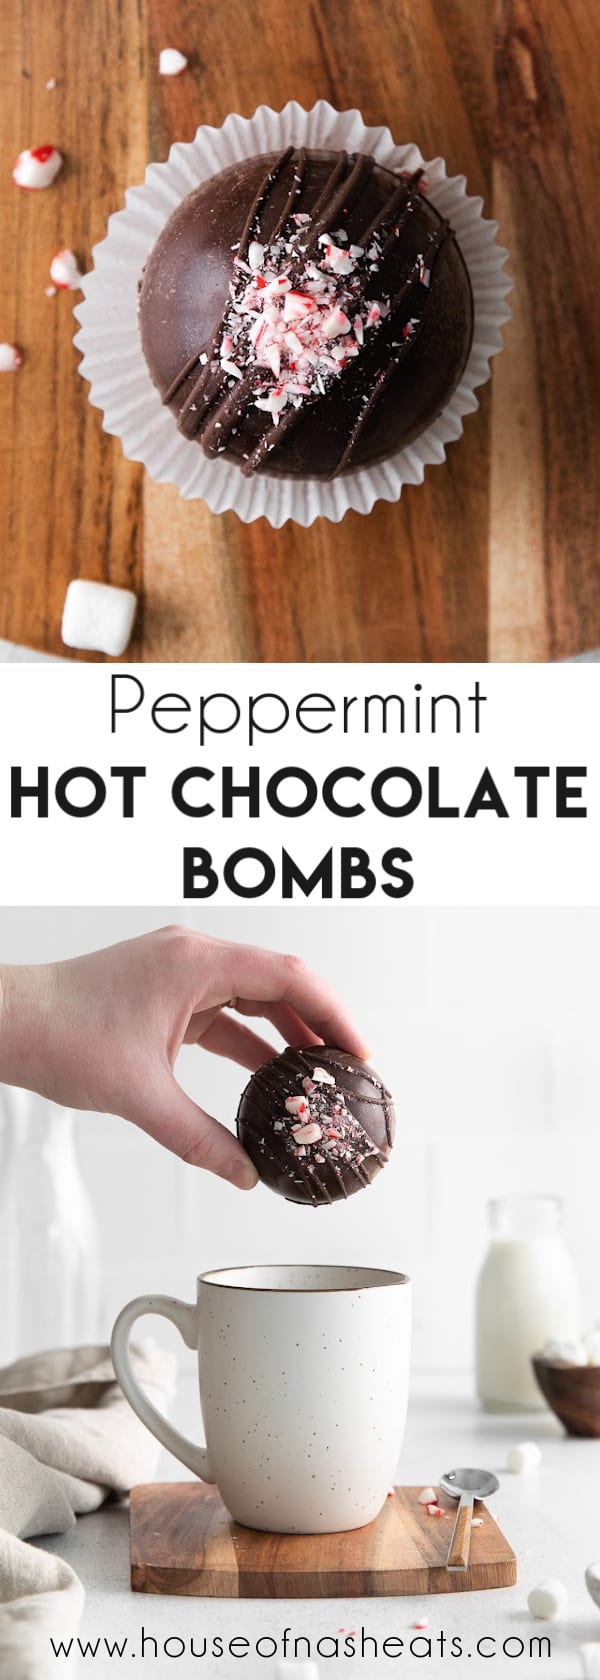 A collage of images of peppermint hot chocolate bombs with text overlay.